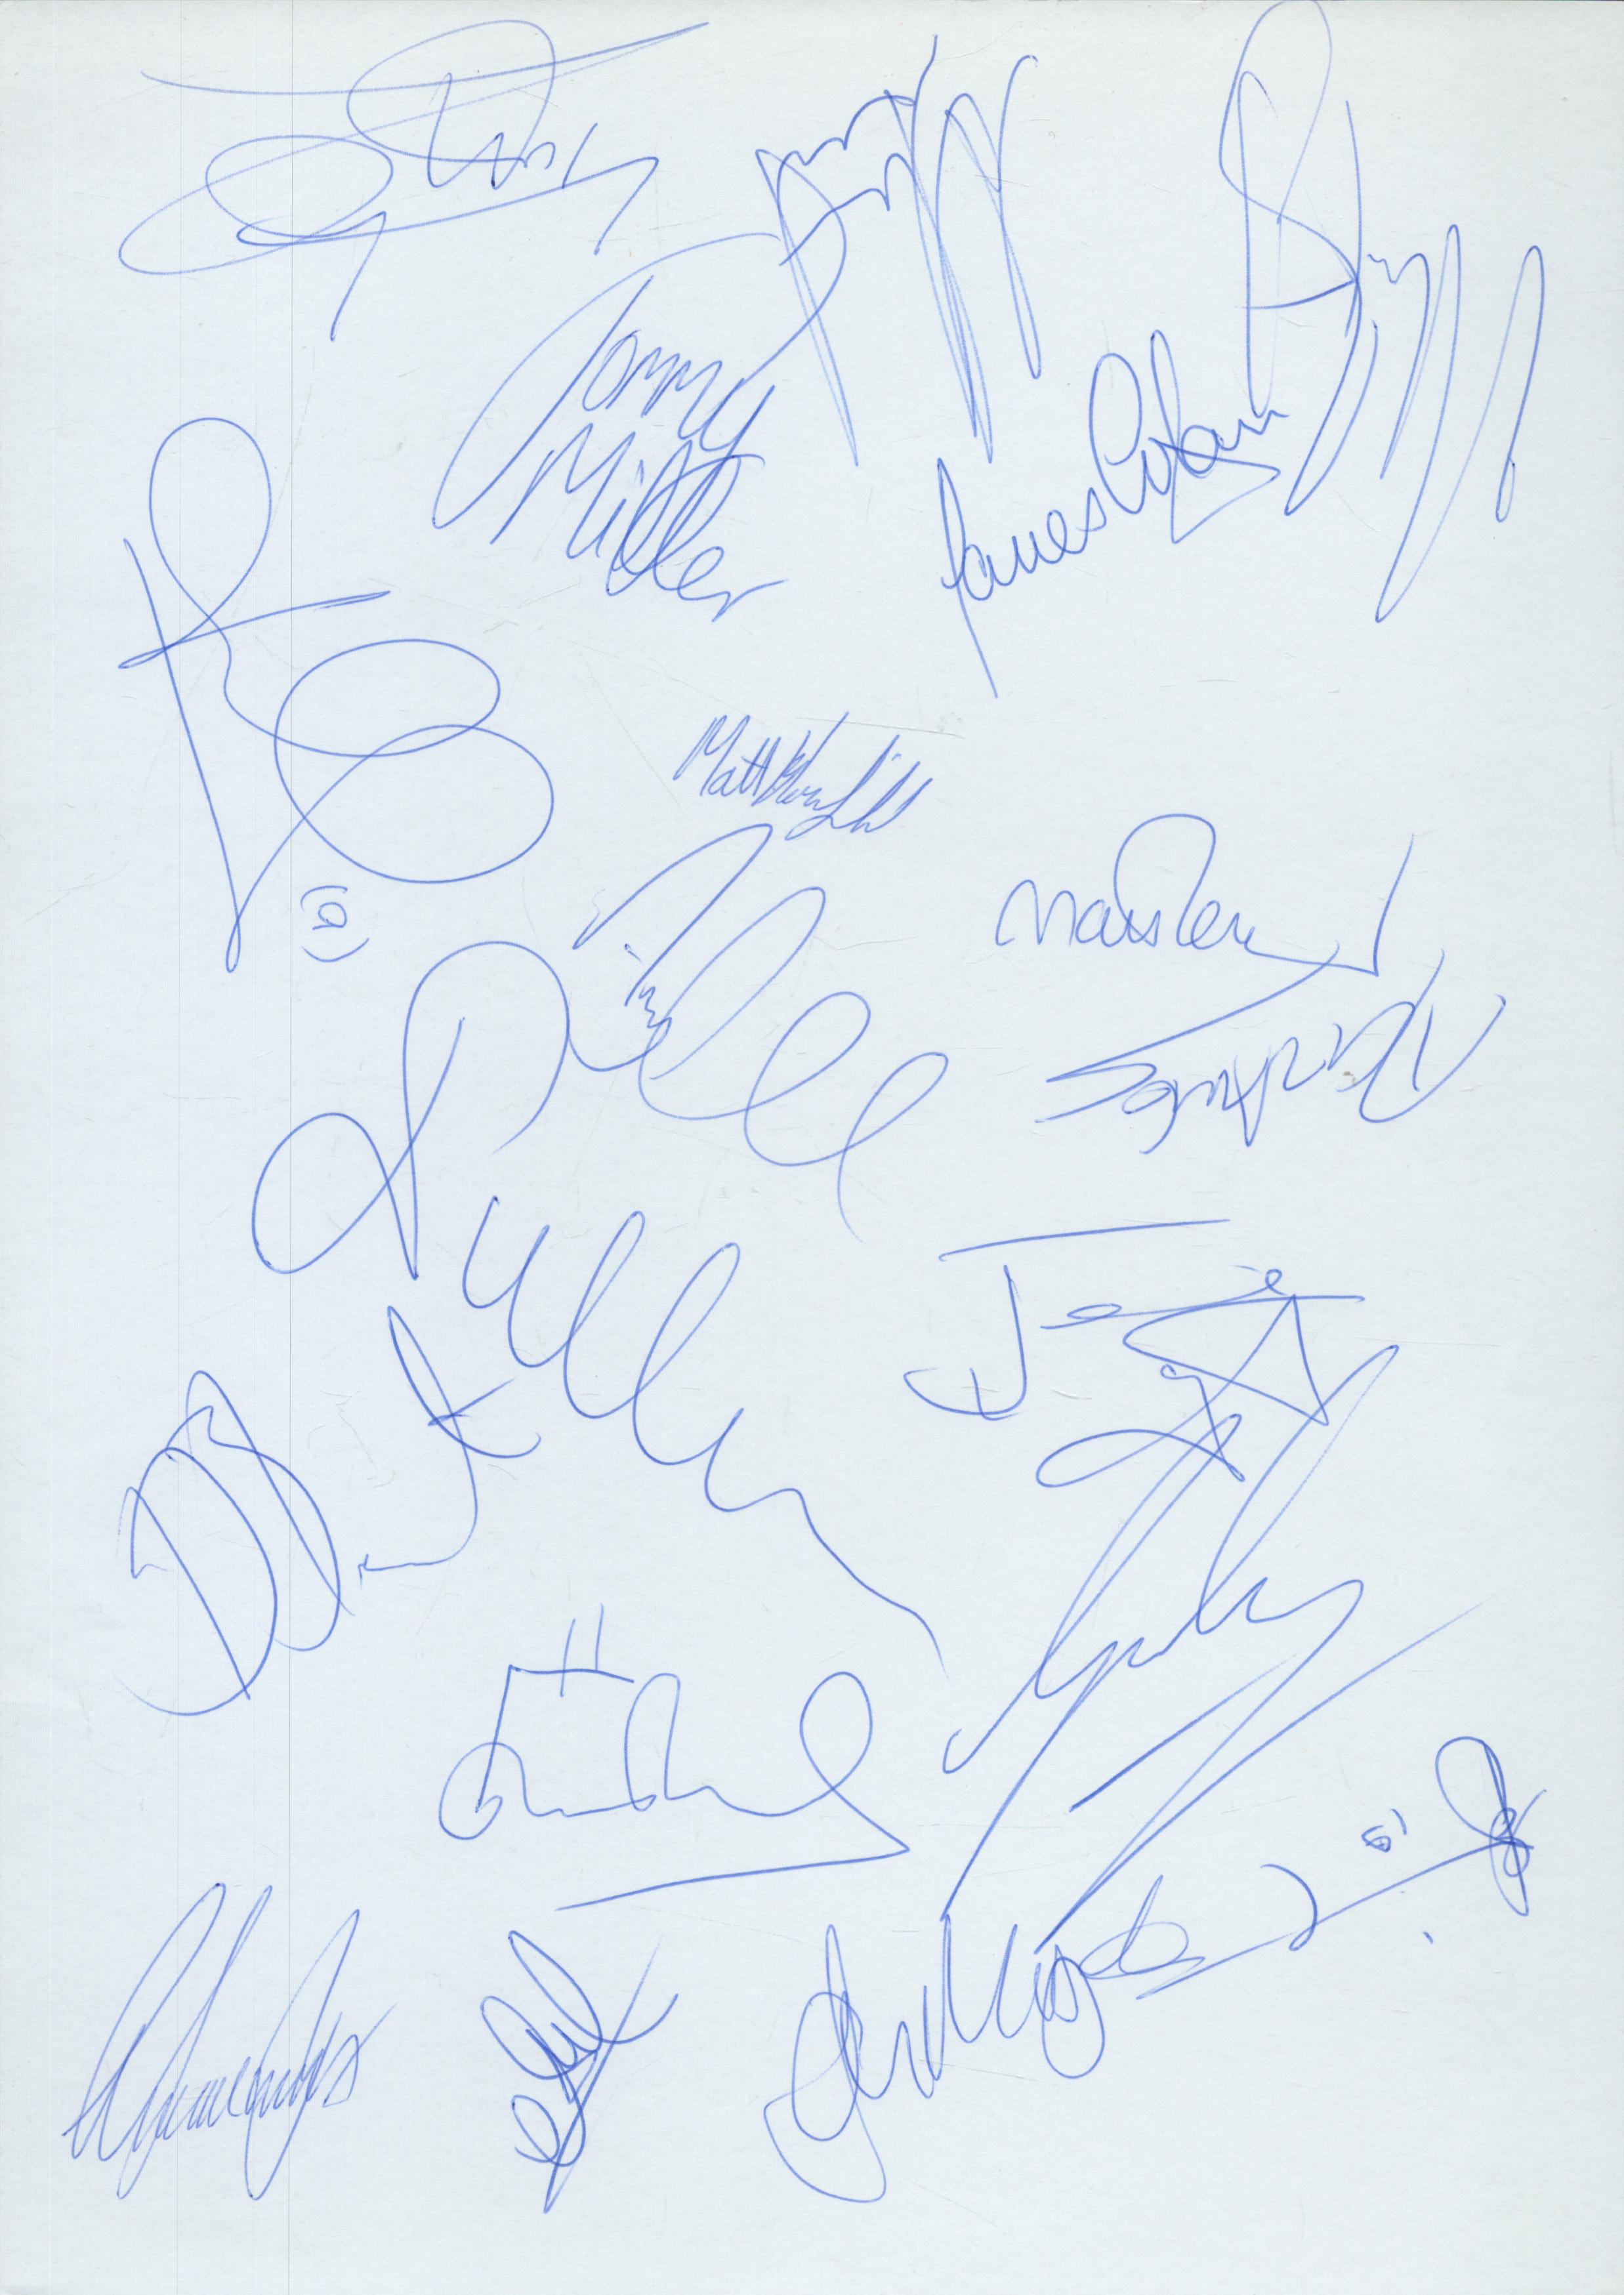 Ipswich Town multi signed A4 Sheet from 2002-03. Signatures such as Marshall, Miller, Pullen, Brown,